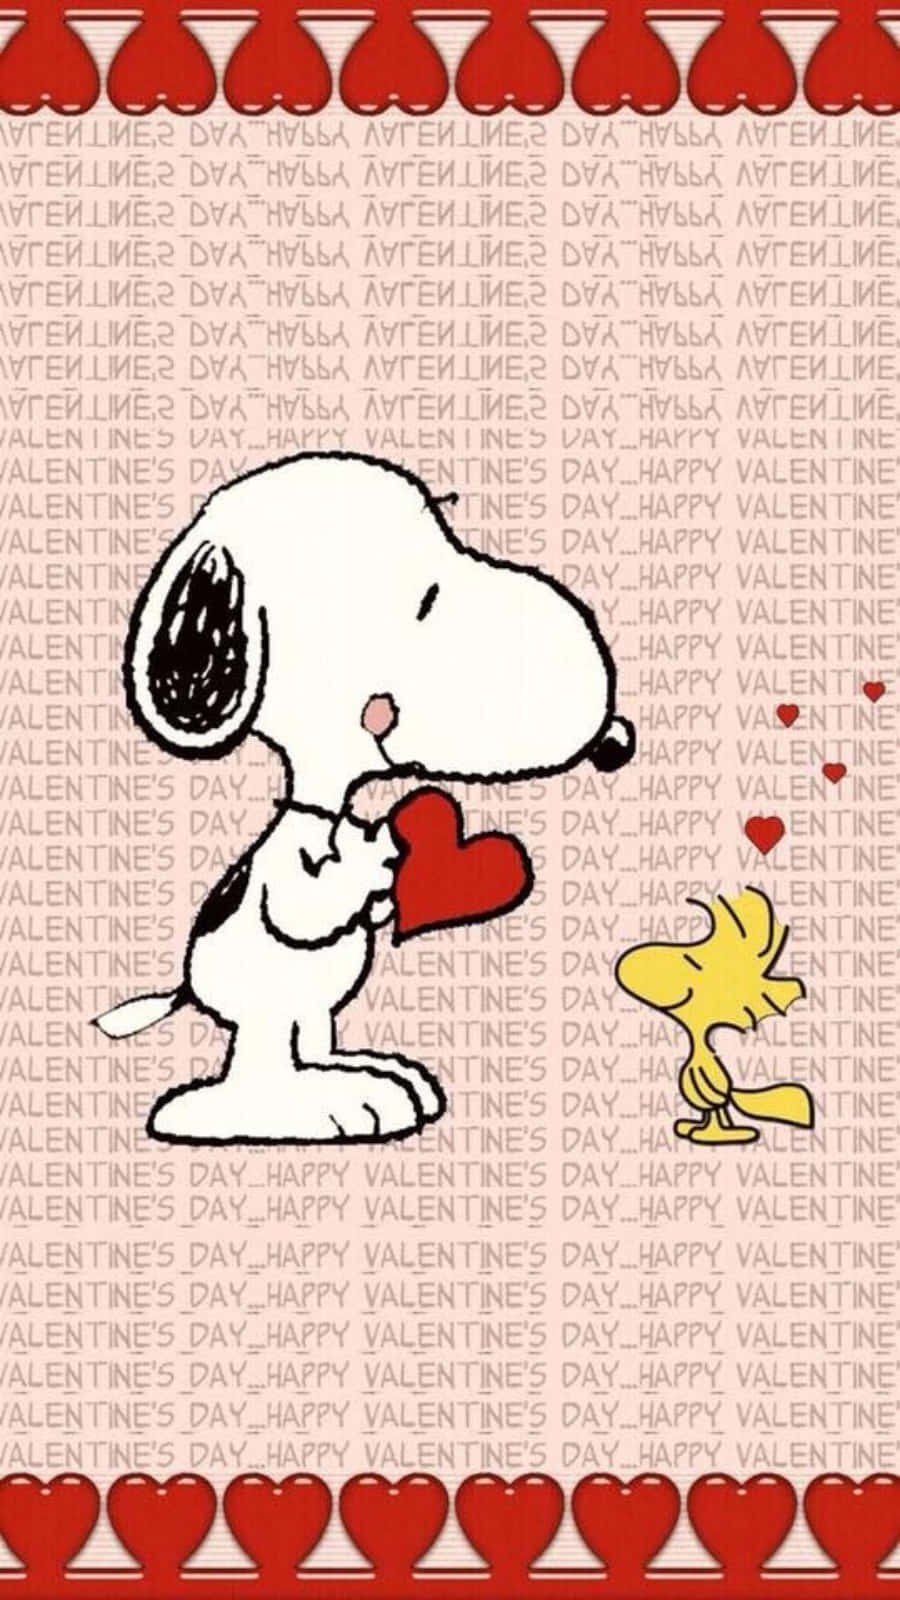 "Love is in the air with this Snoopy Valentine!" Wallpaper